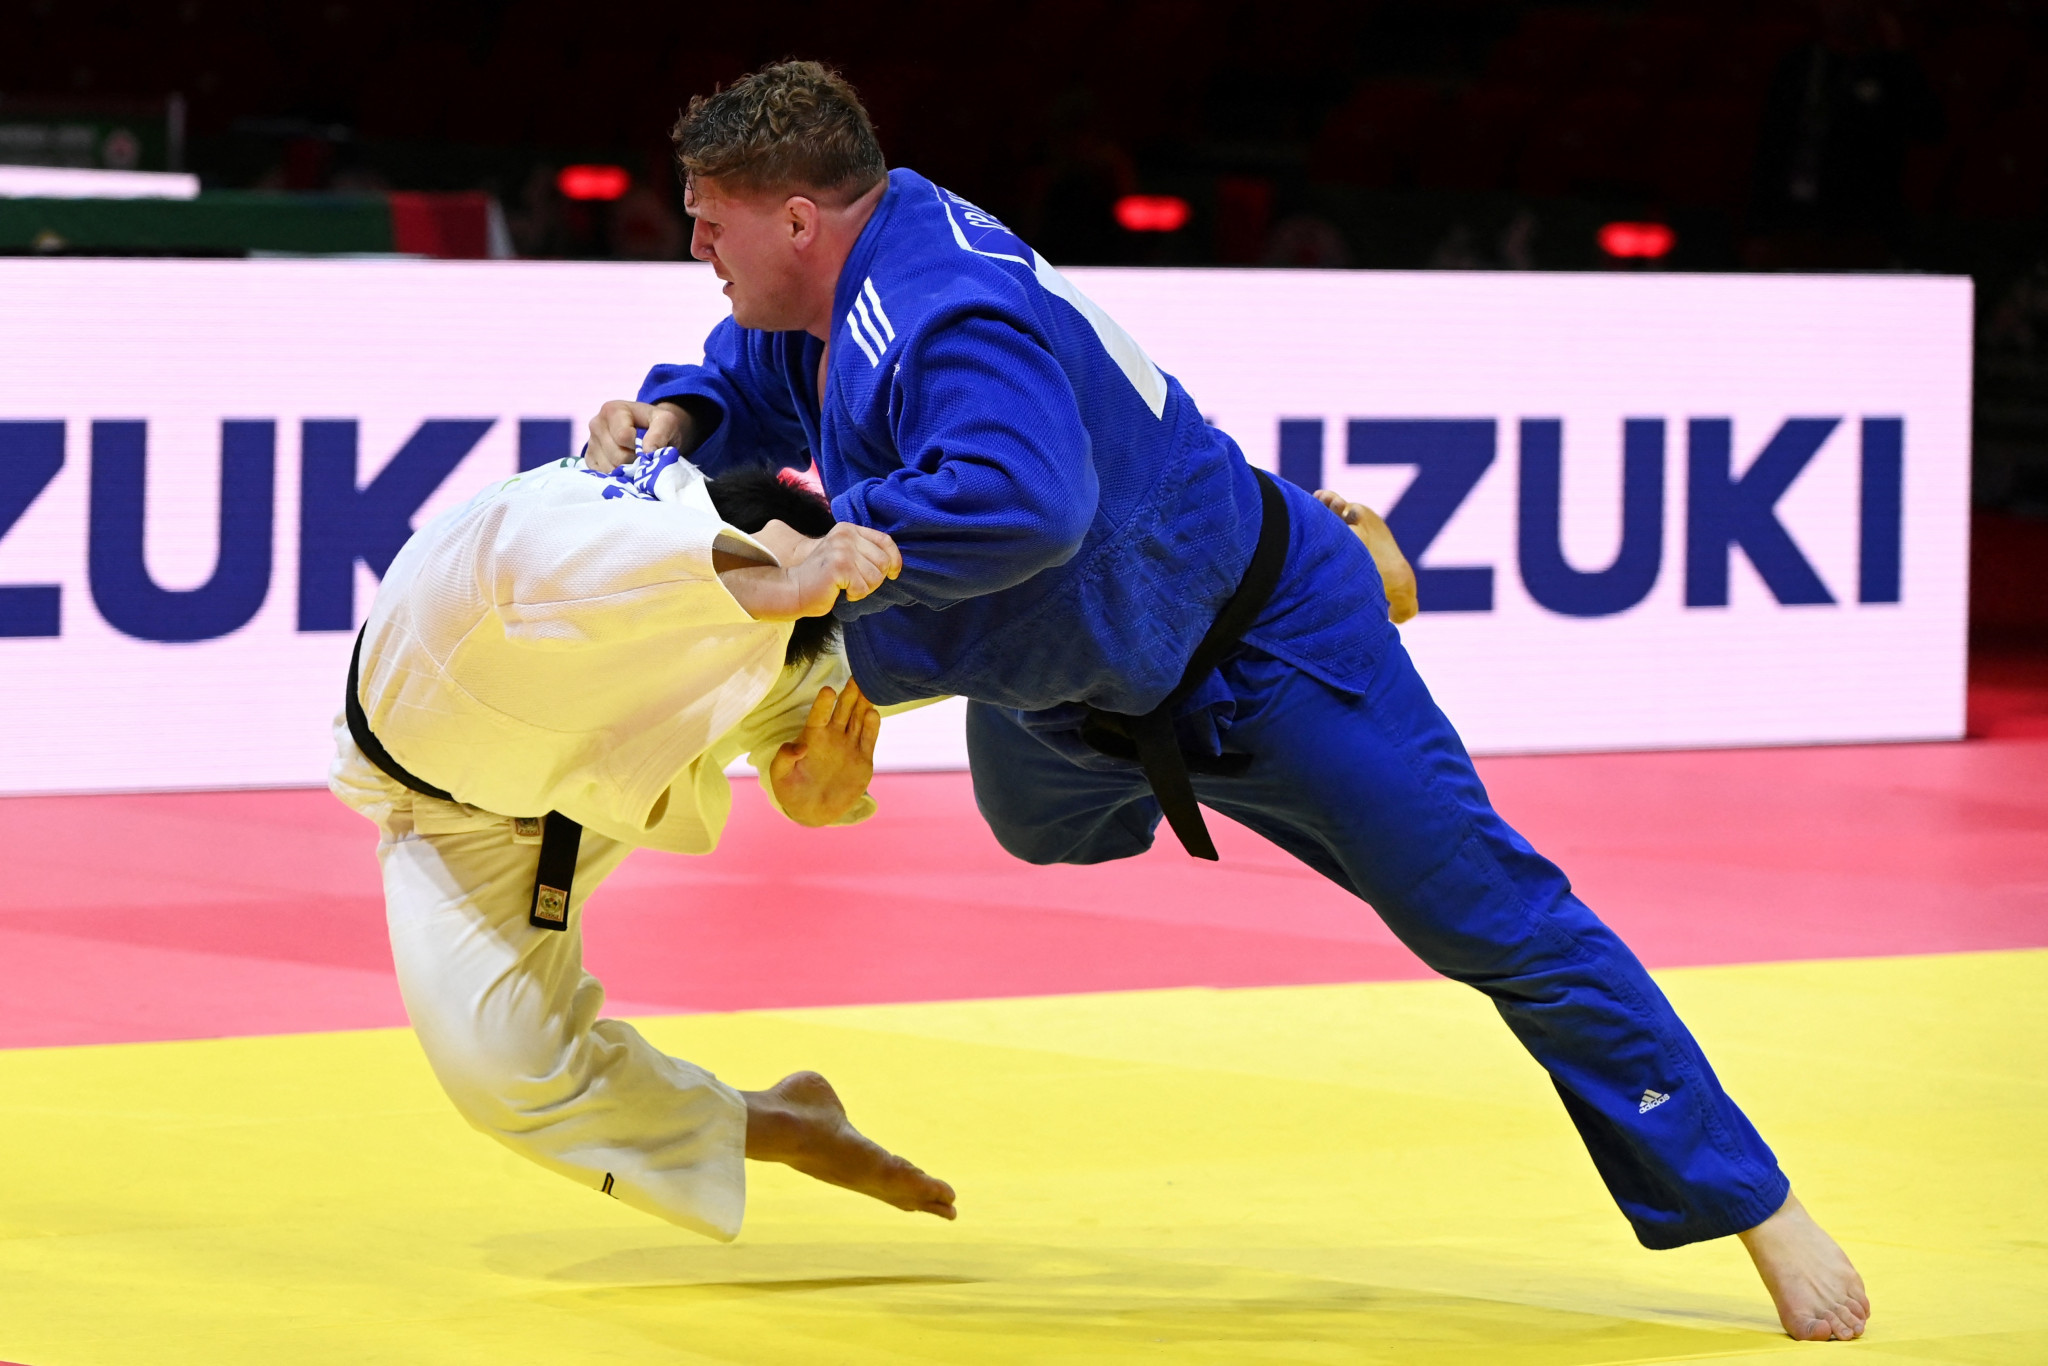 Jur Spijkers won all his matches with an ippon to clinch the men’s over-100kg title ©Getty Images